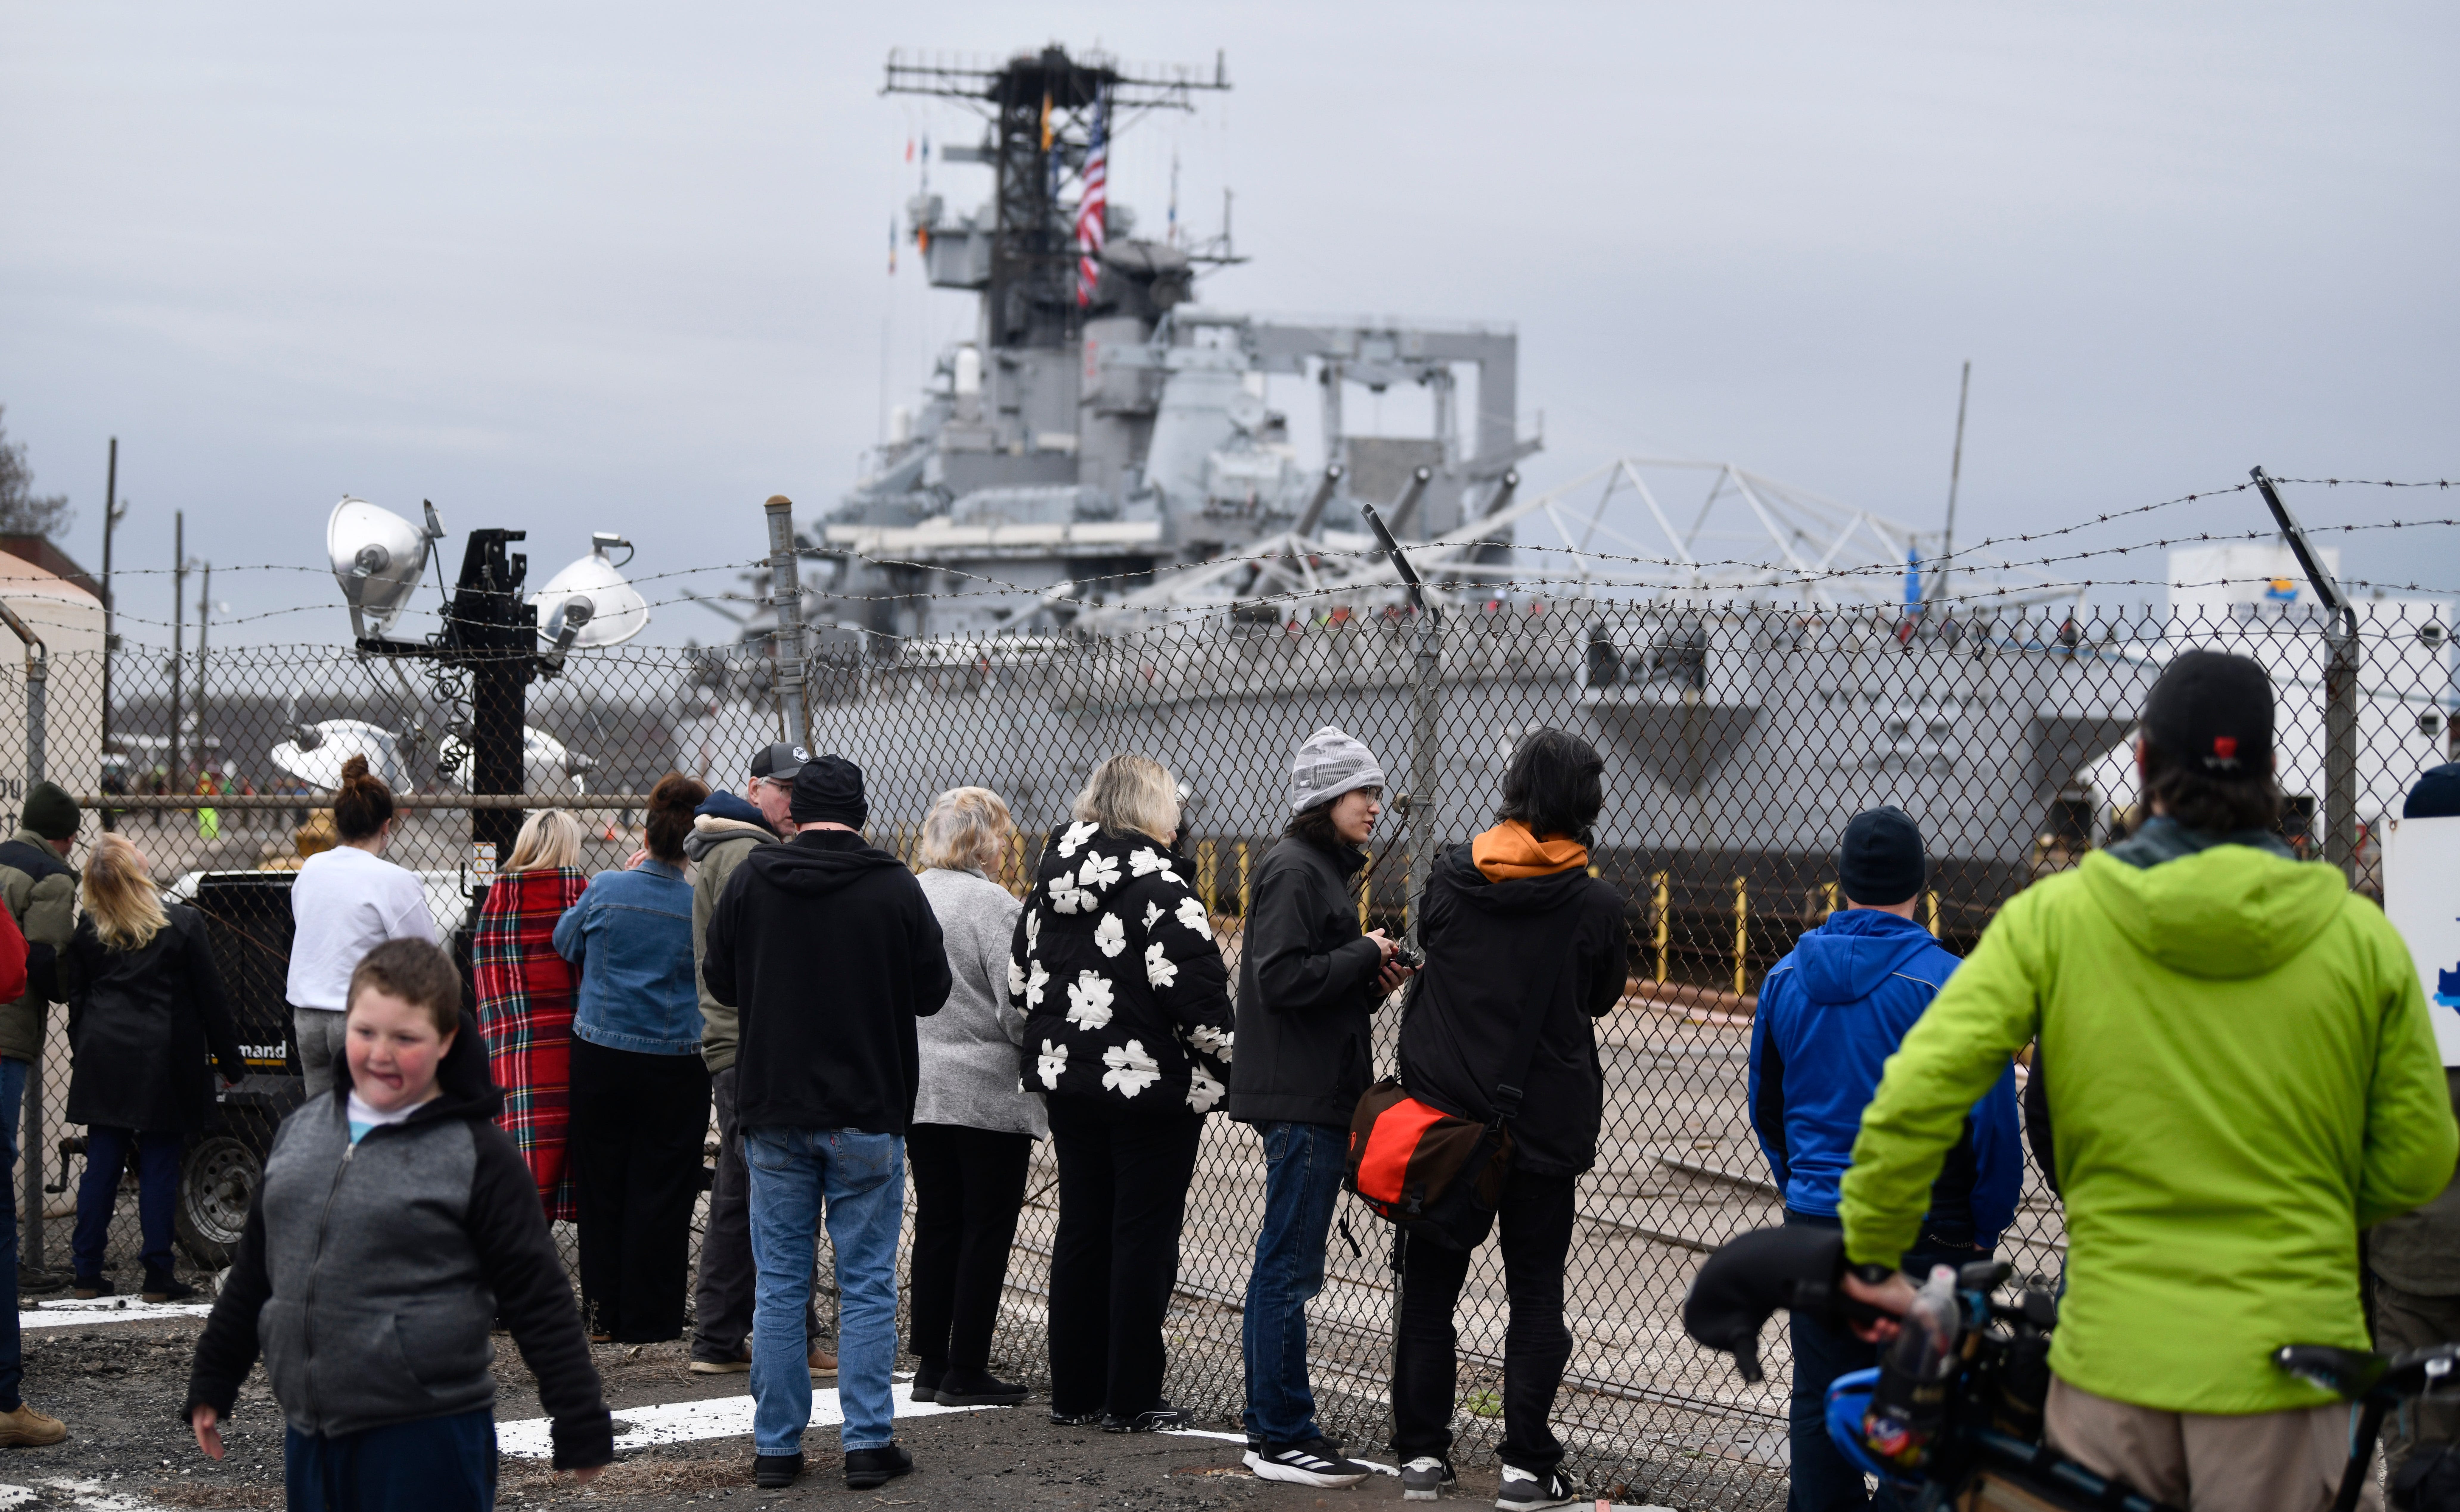 Battleship New Jersey set to make June 20 return to Camden after maintenance in Philly